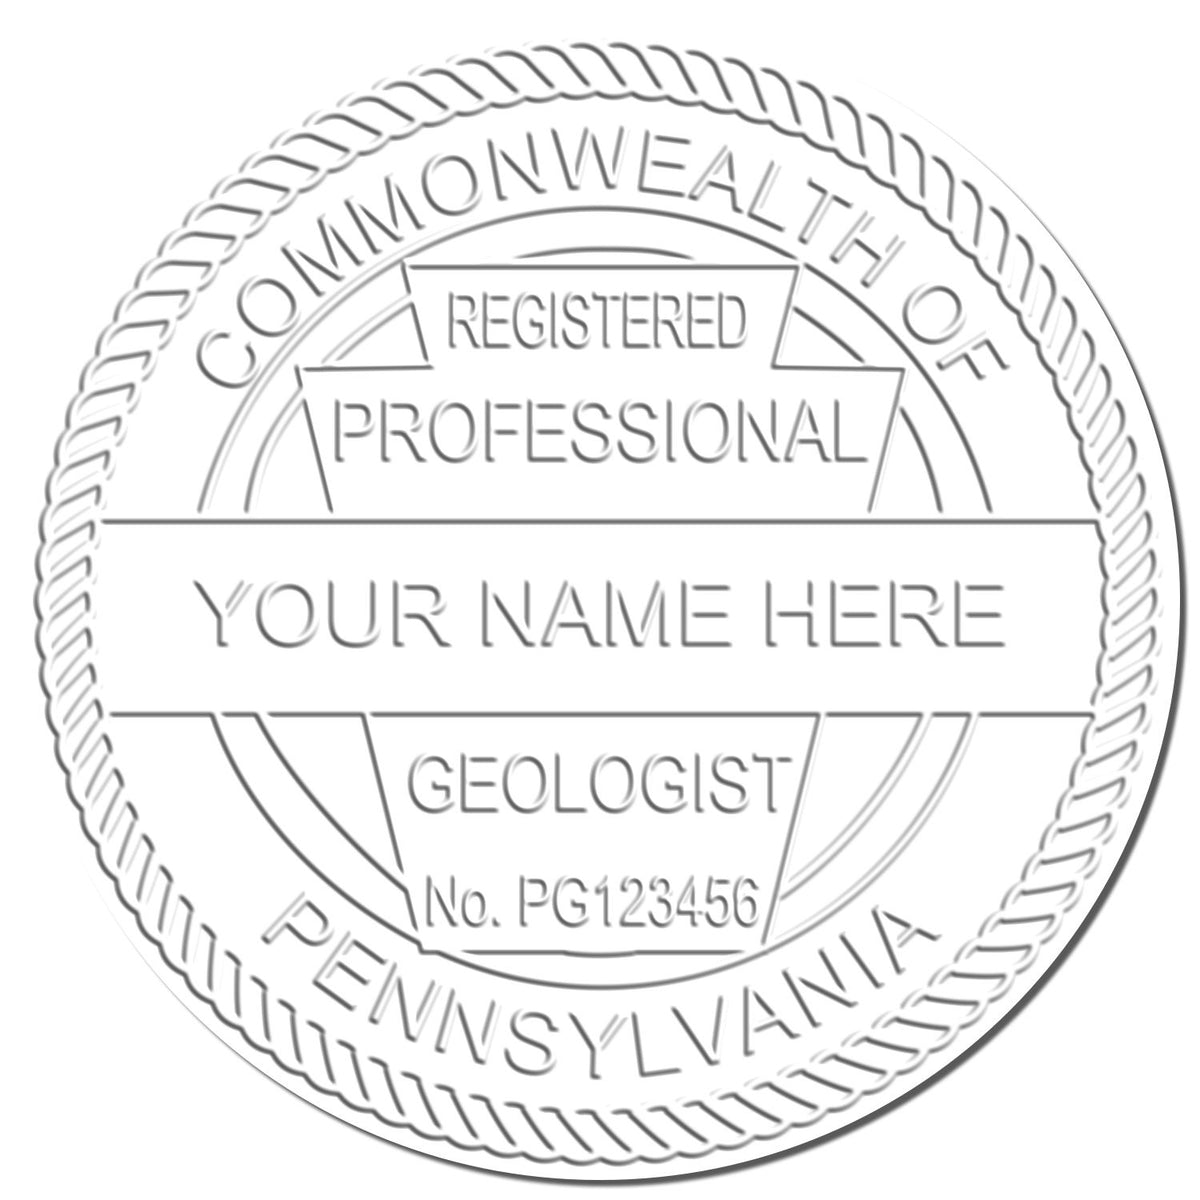 A photograph of the State of Pennsylvania Extended Long Reach Geologist Seal stamp impression reveals a vivid, professional image of the on paper.